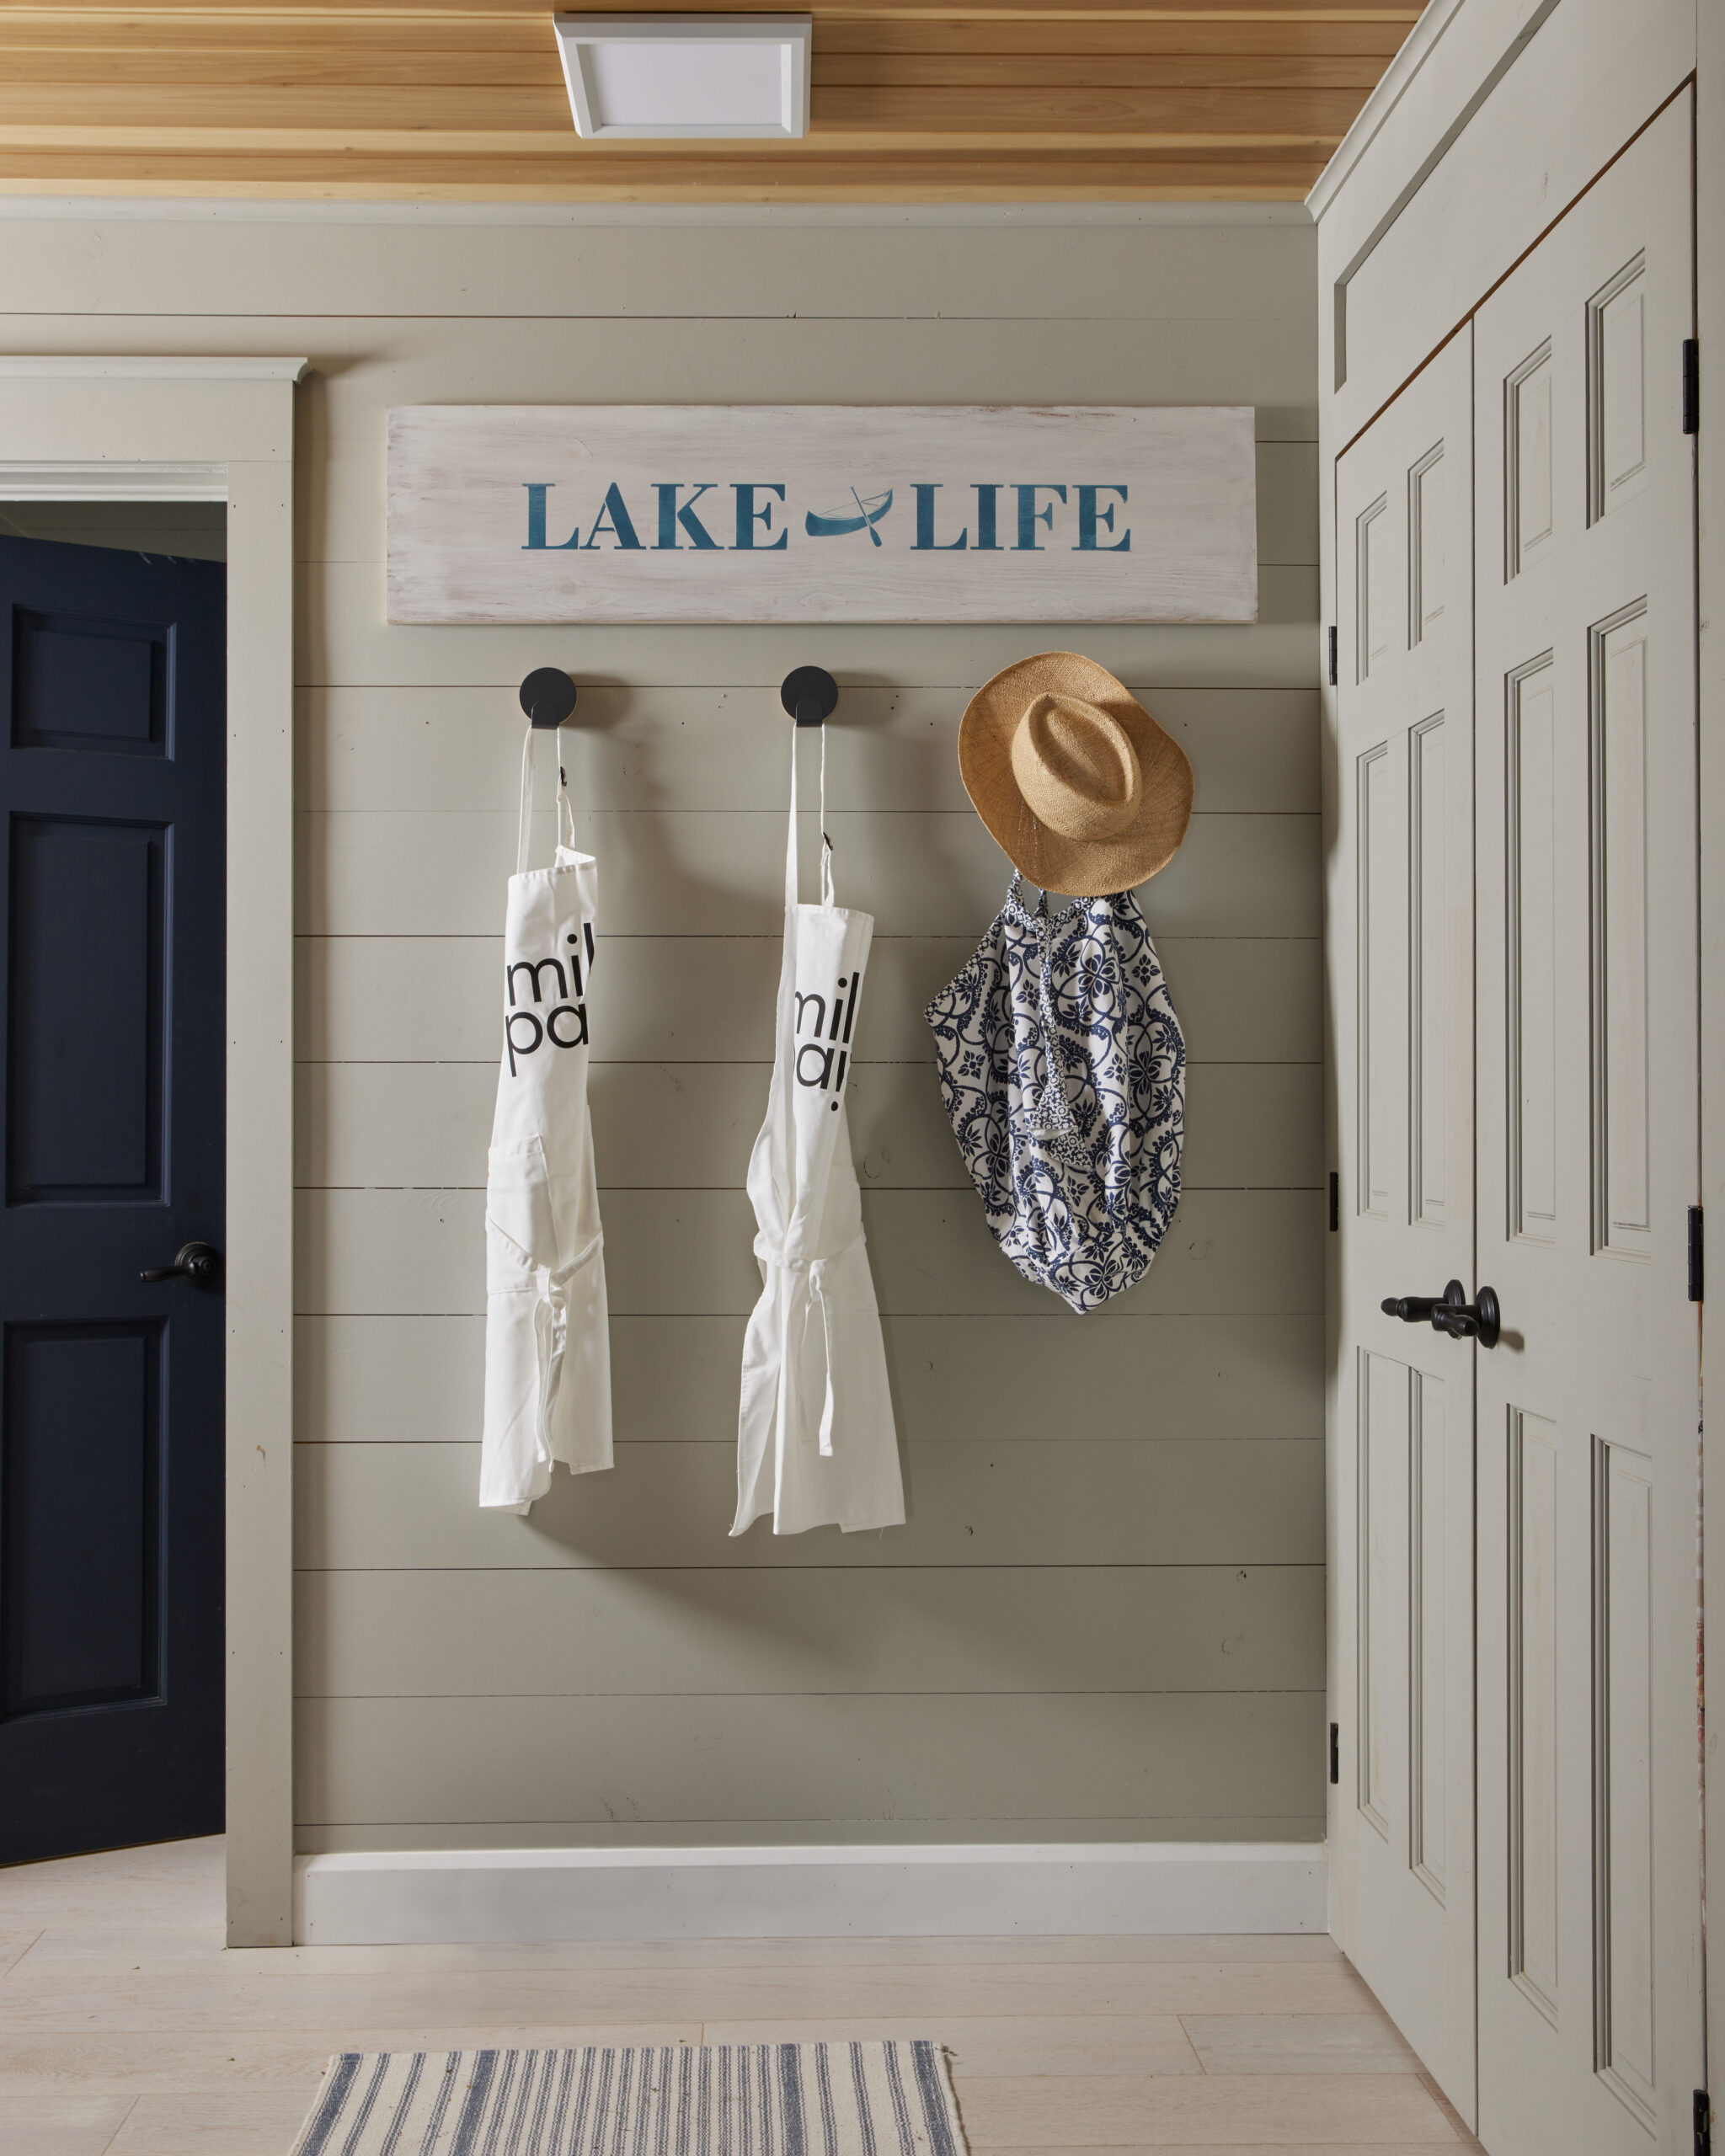 Entrance way to cottage with a sign that reads "lake life", hooks below the sign have a sun hat & coverup as well as two milk paint aprons hanging